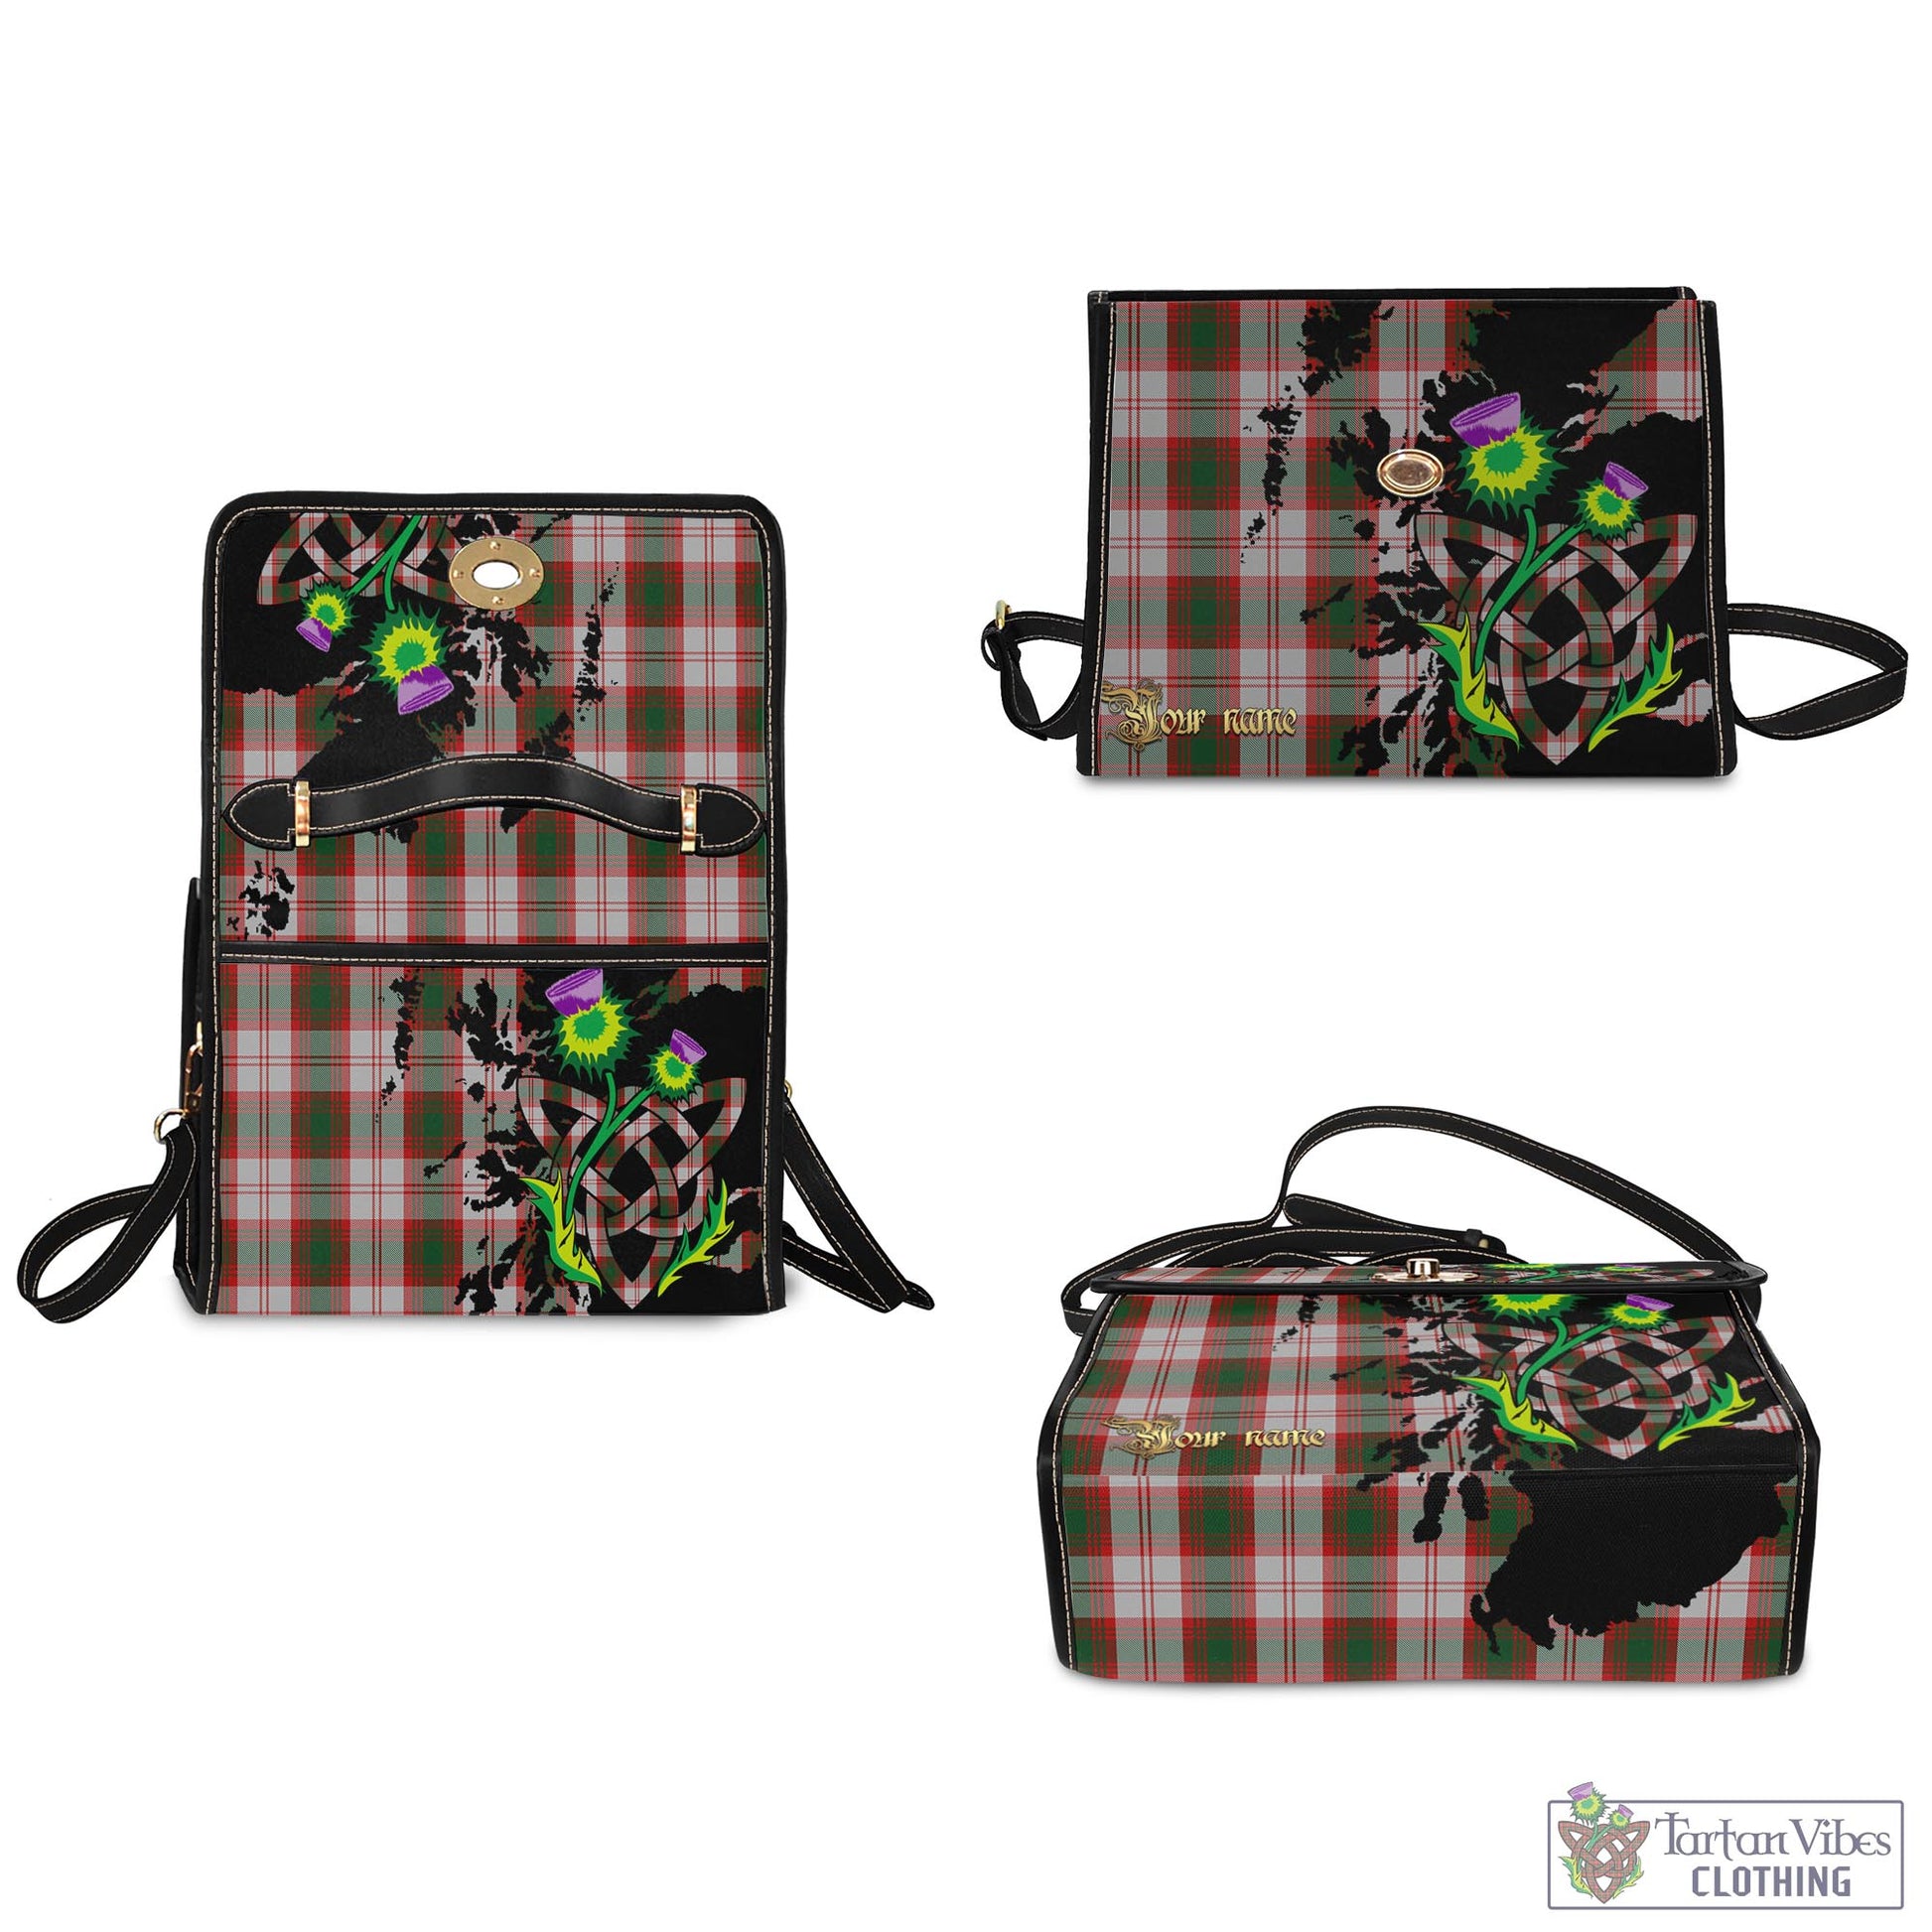 Tartan Vibes Clothing Lindsay Dress Red Tartan Waterproof Canvas Bag with Scotland Map and Thistle Celtic Accents